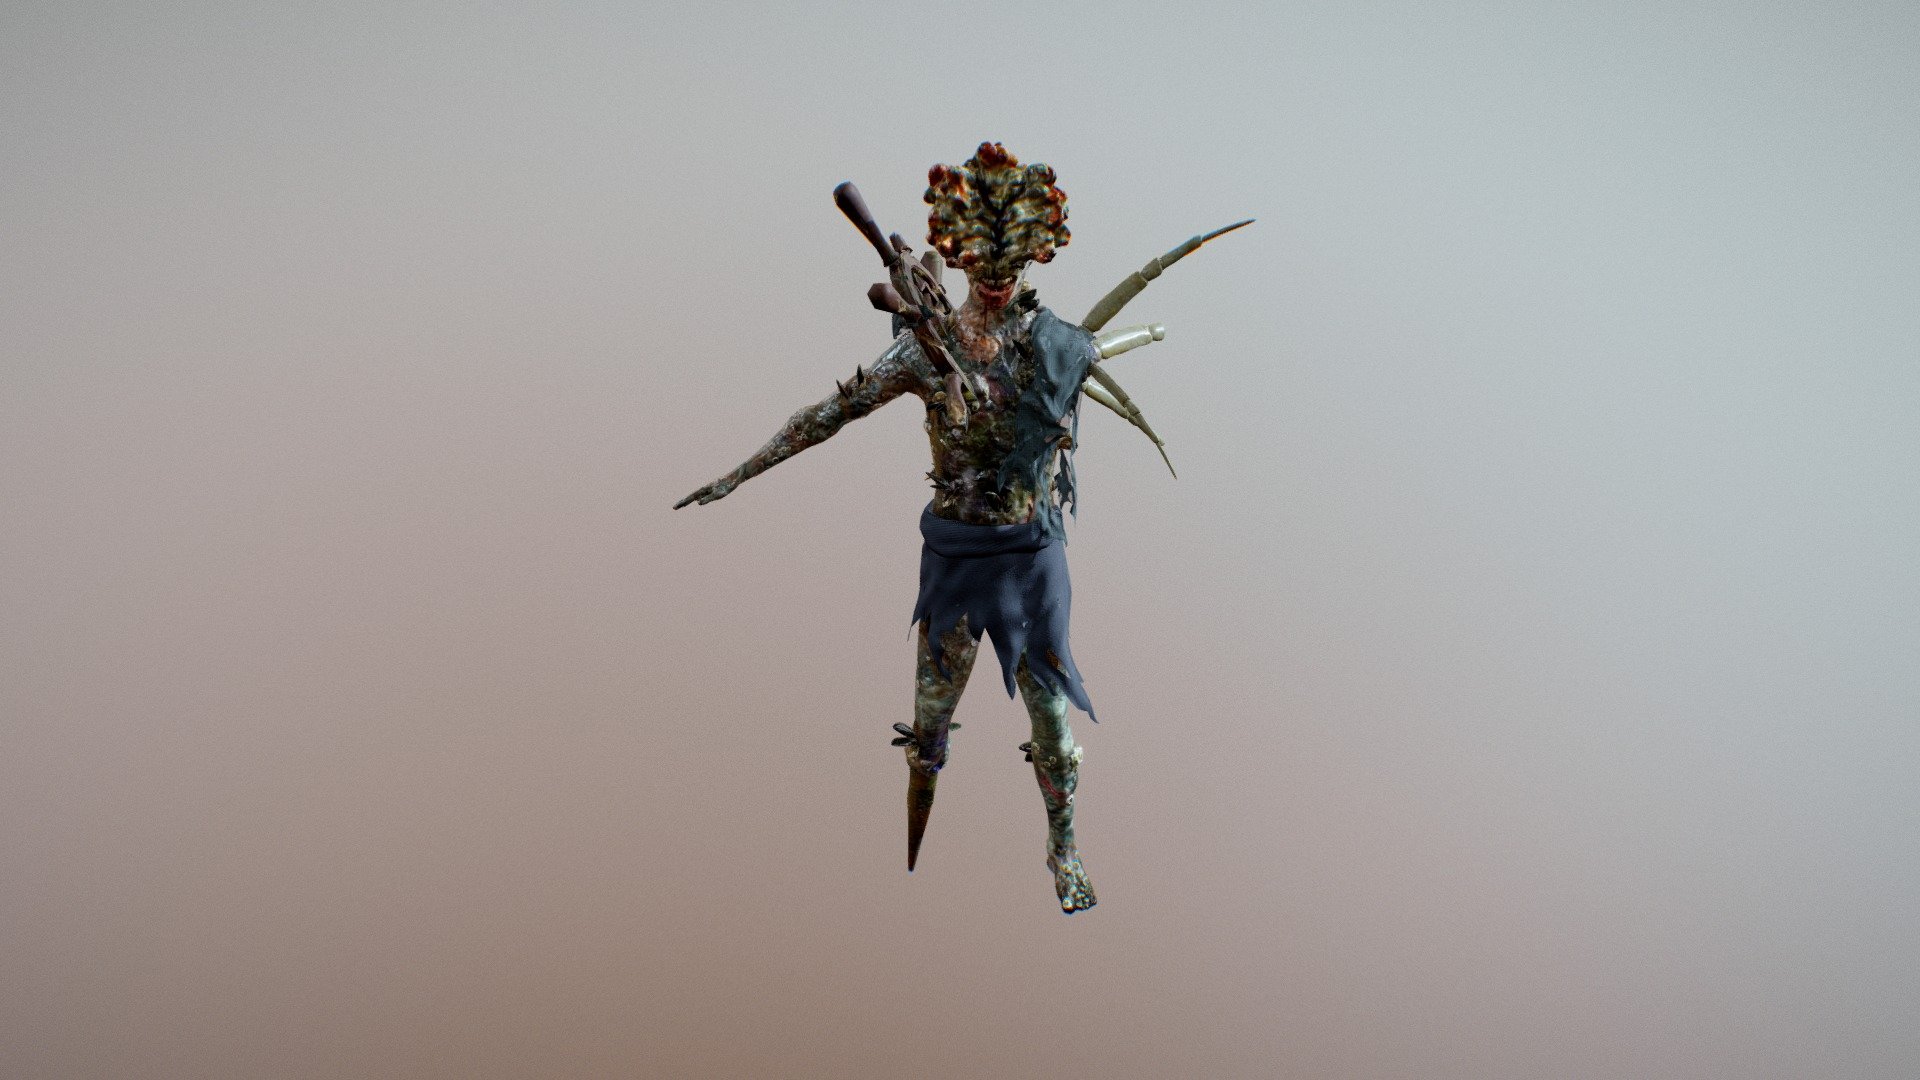 A mashup between a clicker from the amazing &lsquo;The Last of Us' and a pirate from the &lsquo;Pirates of the Caribbean', this undead abomination still has a debt to pay before the mast 3d model